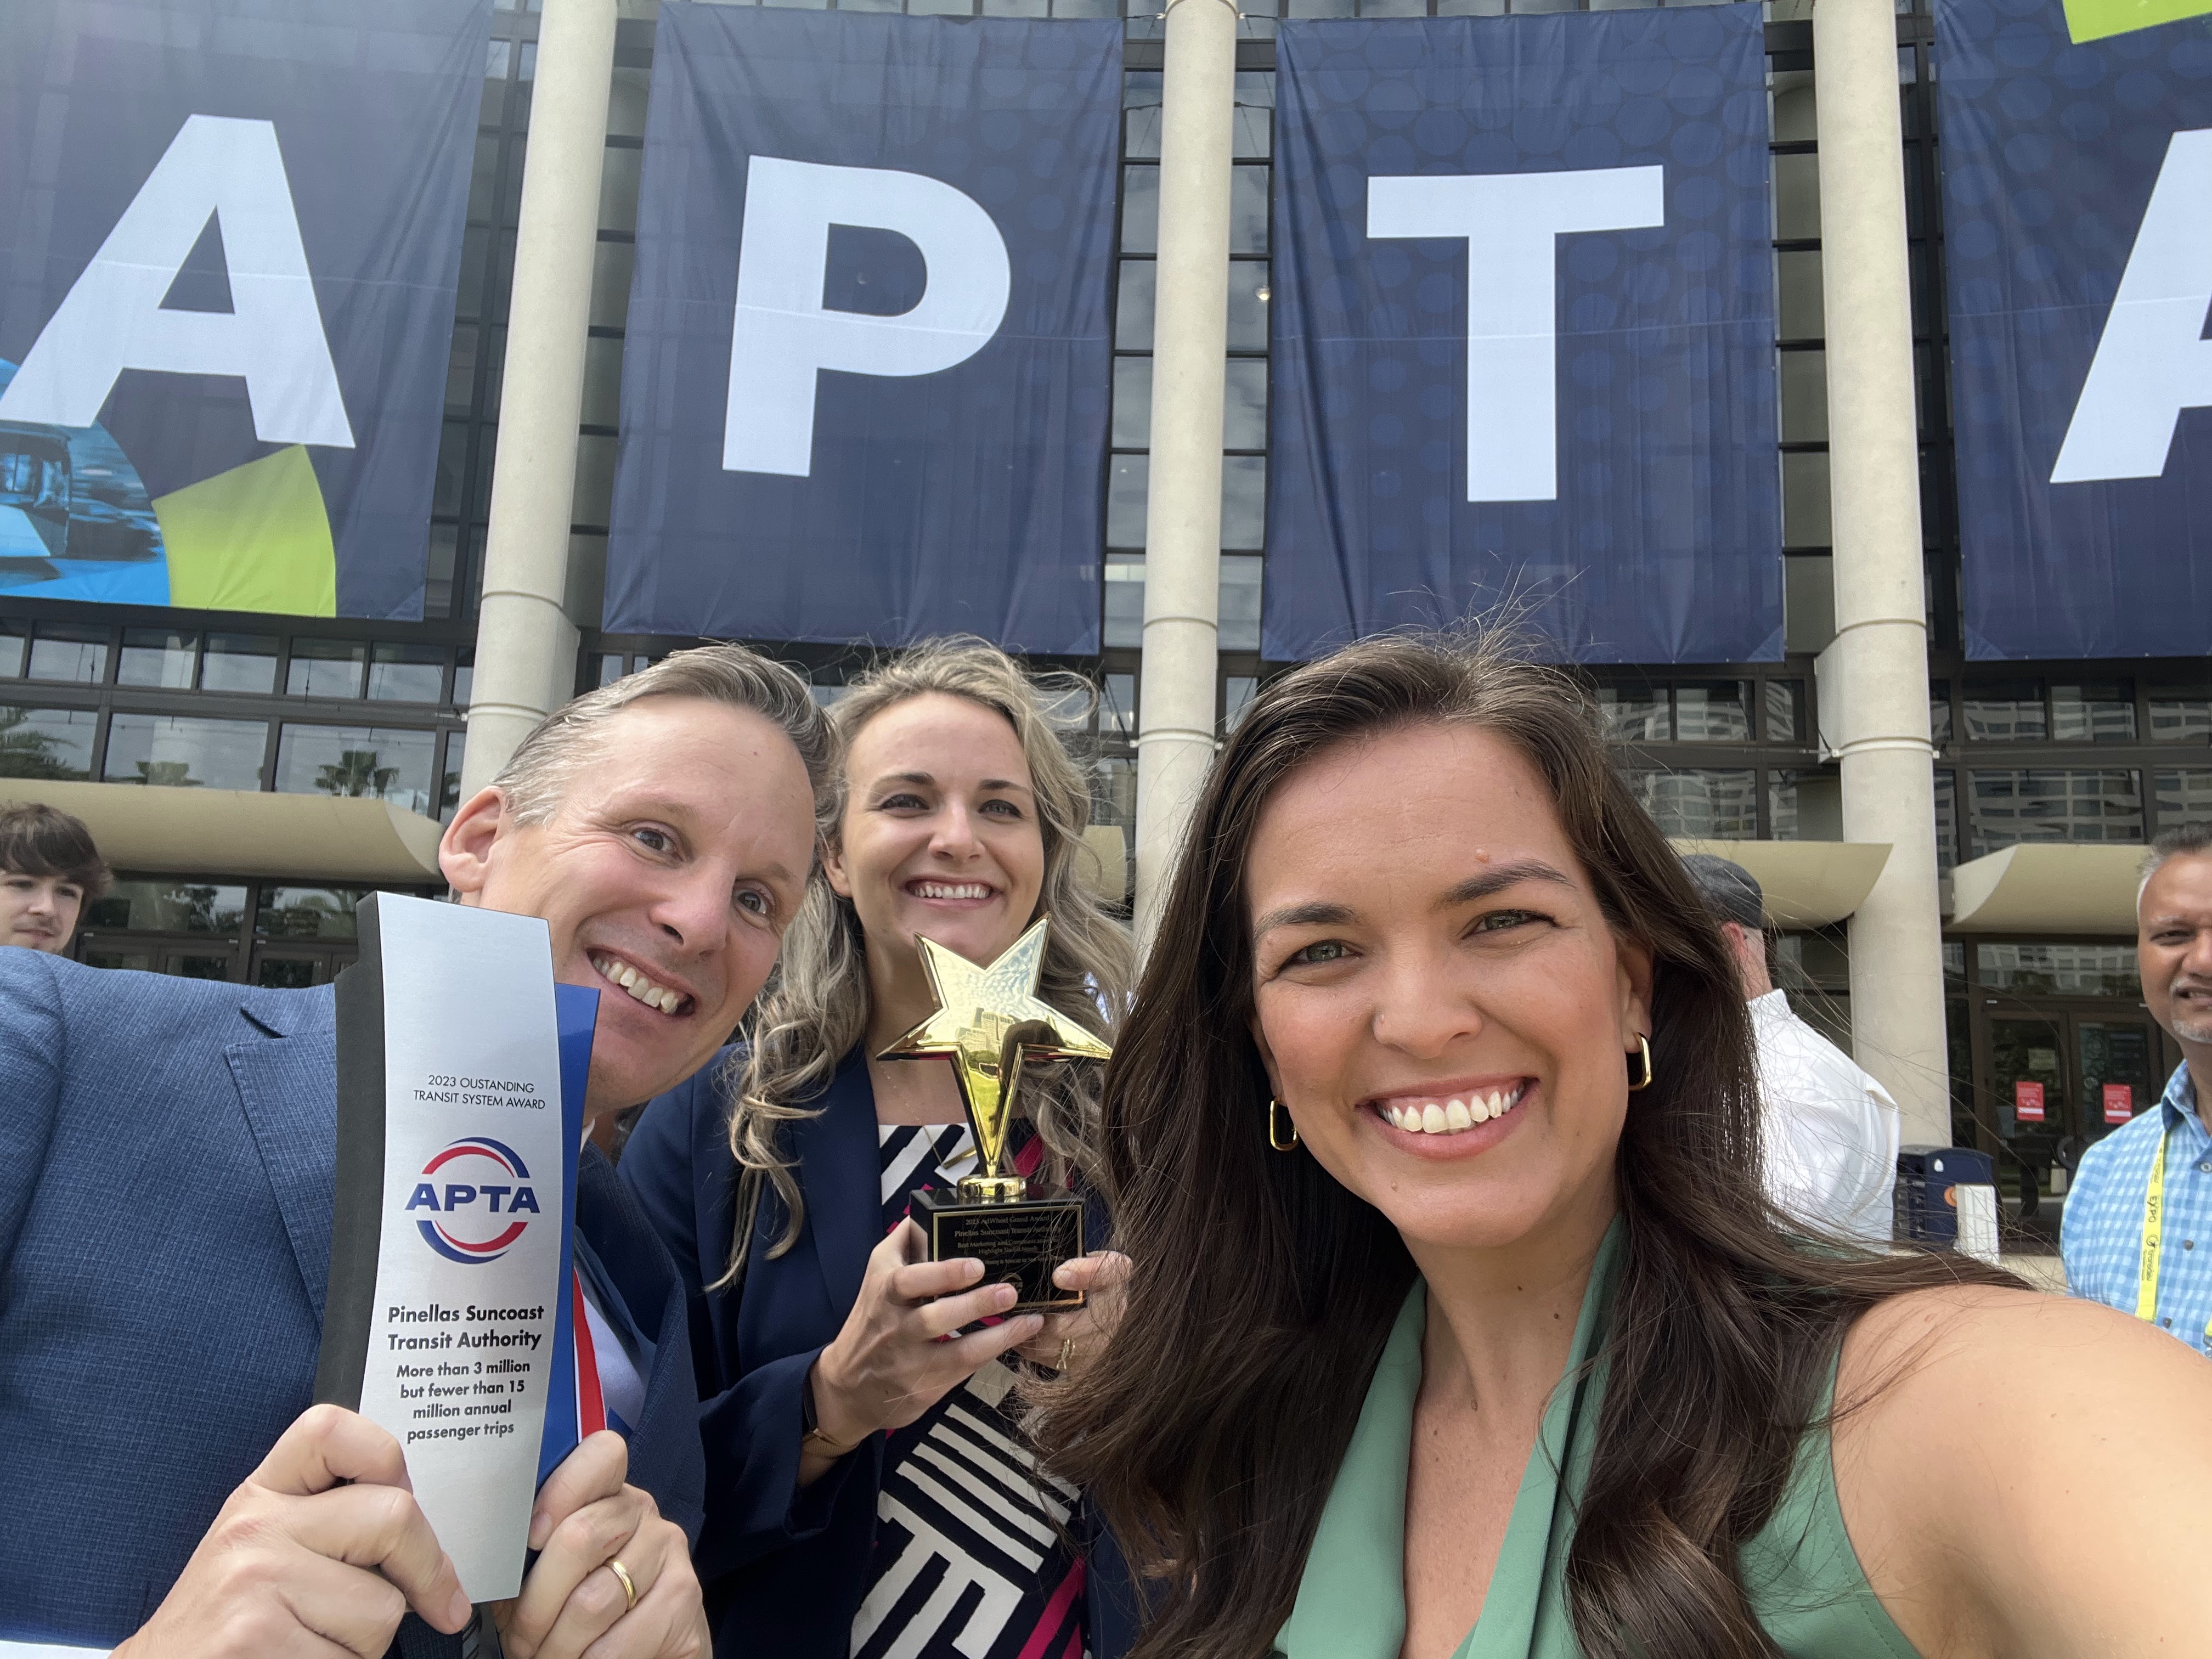 CEO Brad Miller, Communications Manager Stephanie Weaver, and Marketing Director Whitney Fox smiling while holding awards outside of the APTA conference